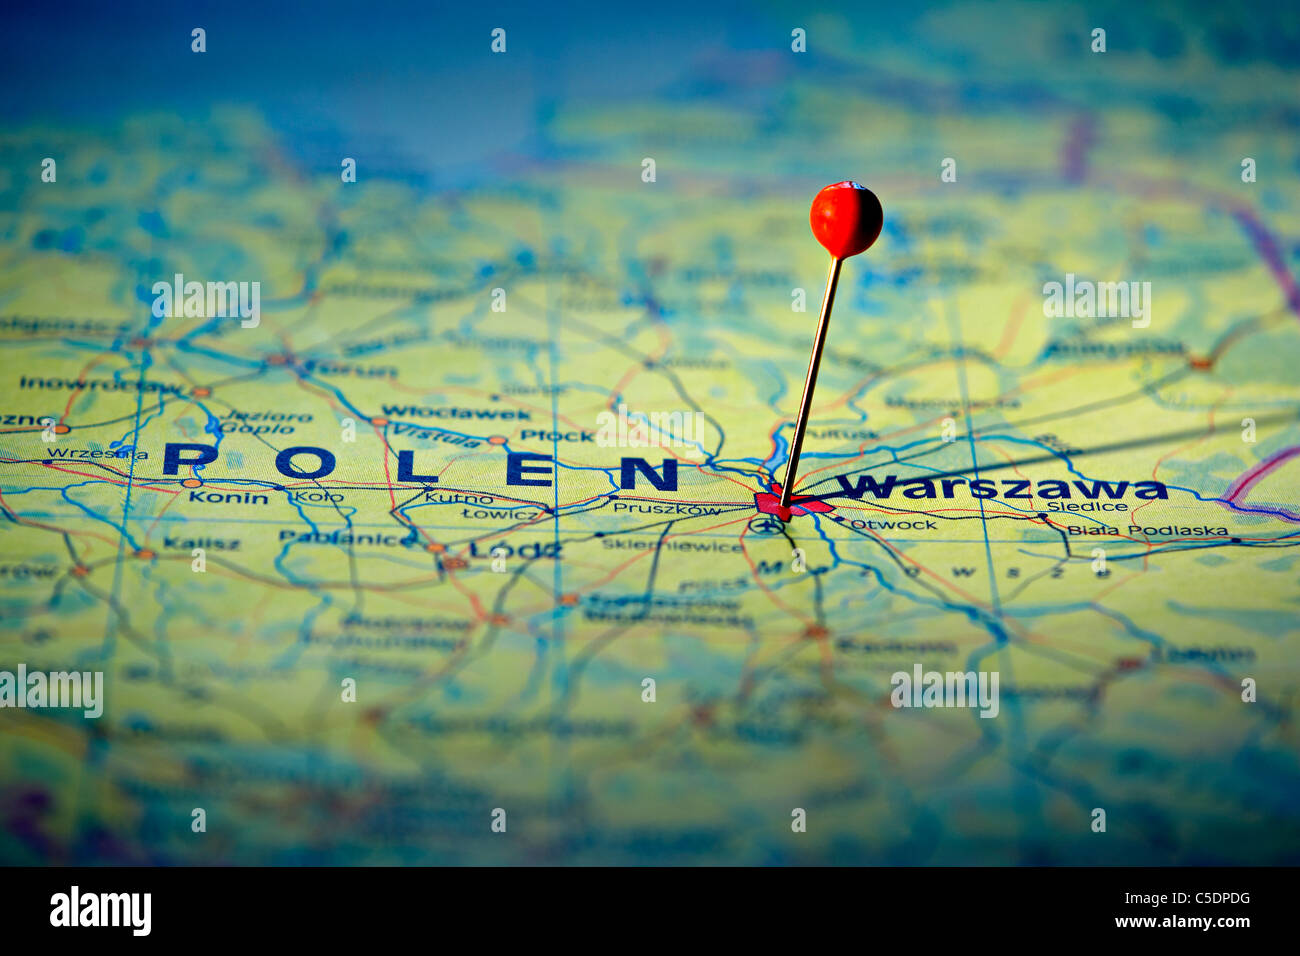 Close-up of a red map pin on Warszawa at a map Stock Photo